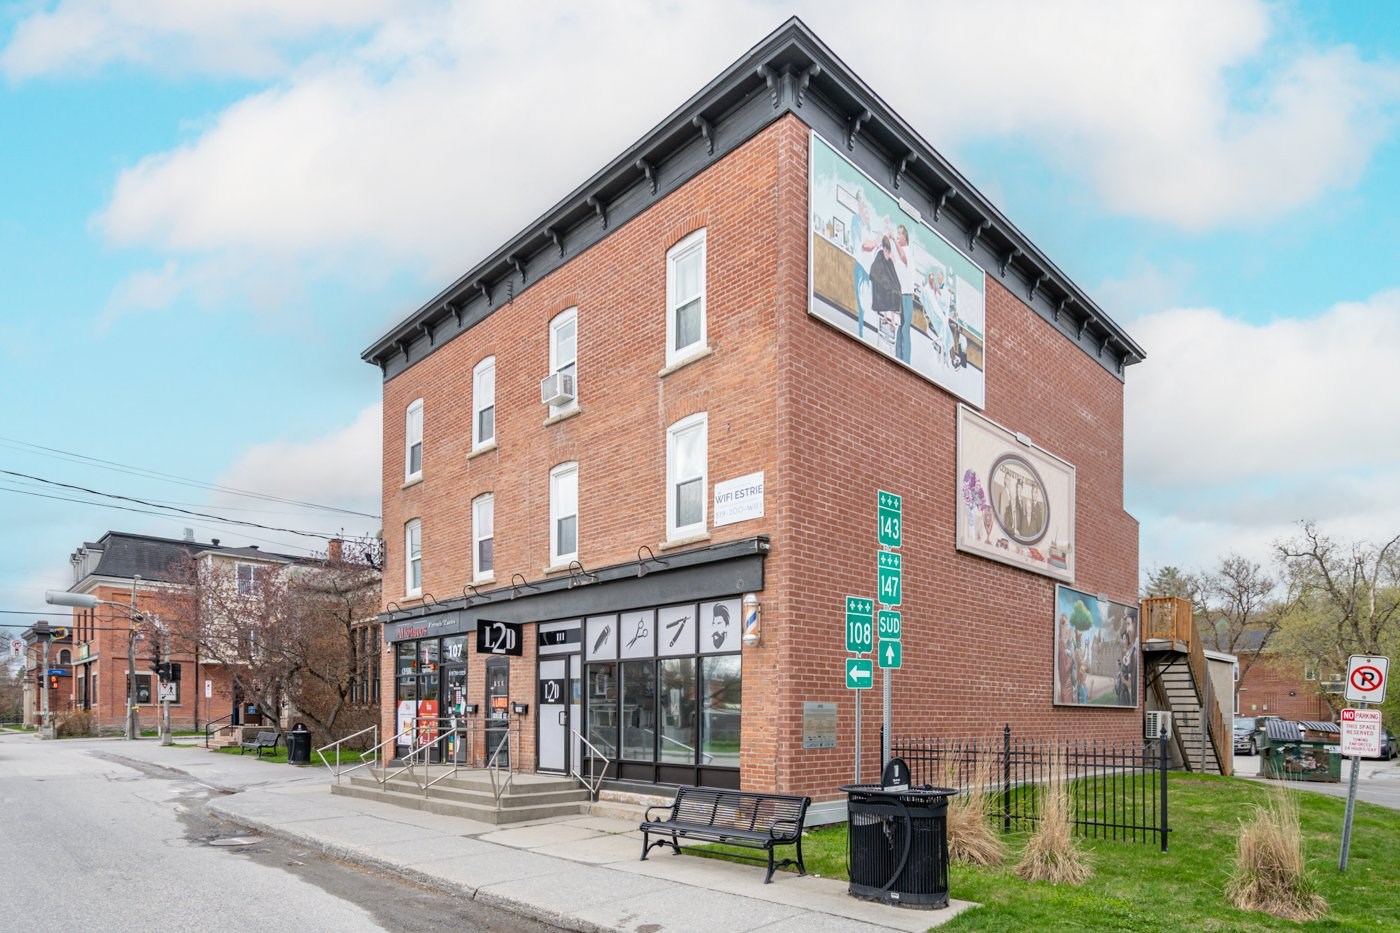 Commercial rental space/Office for rent, Sherbrooke